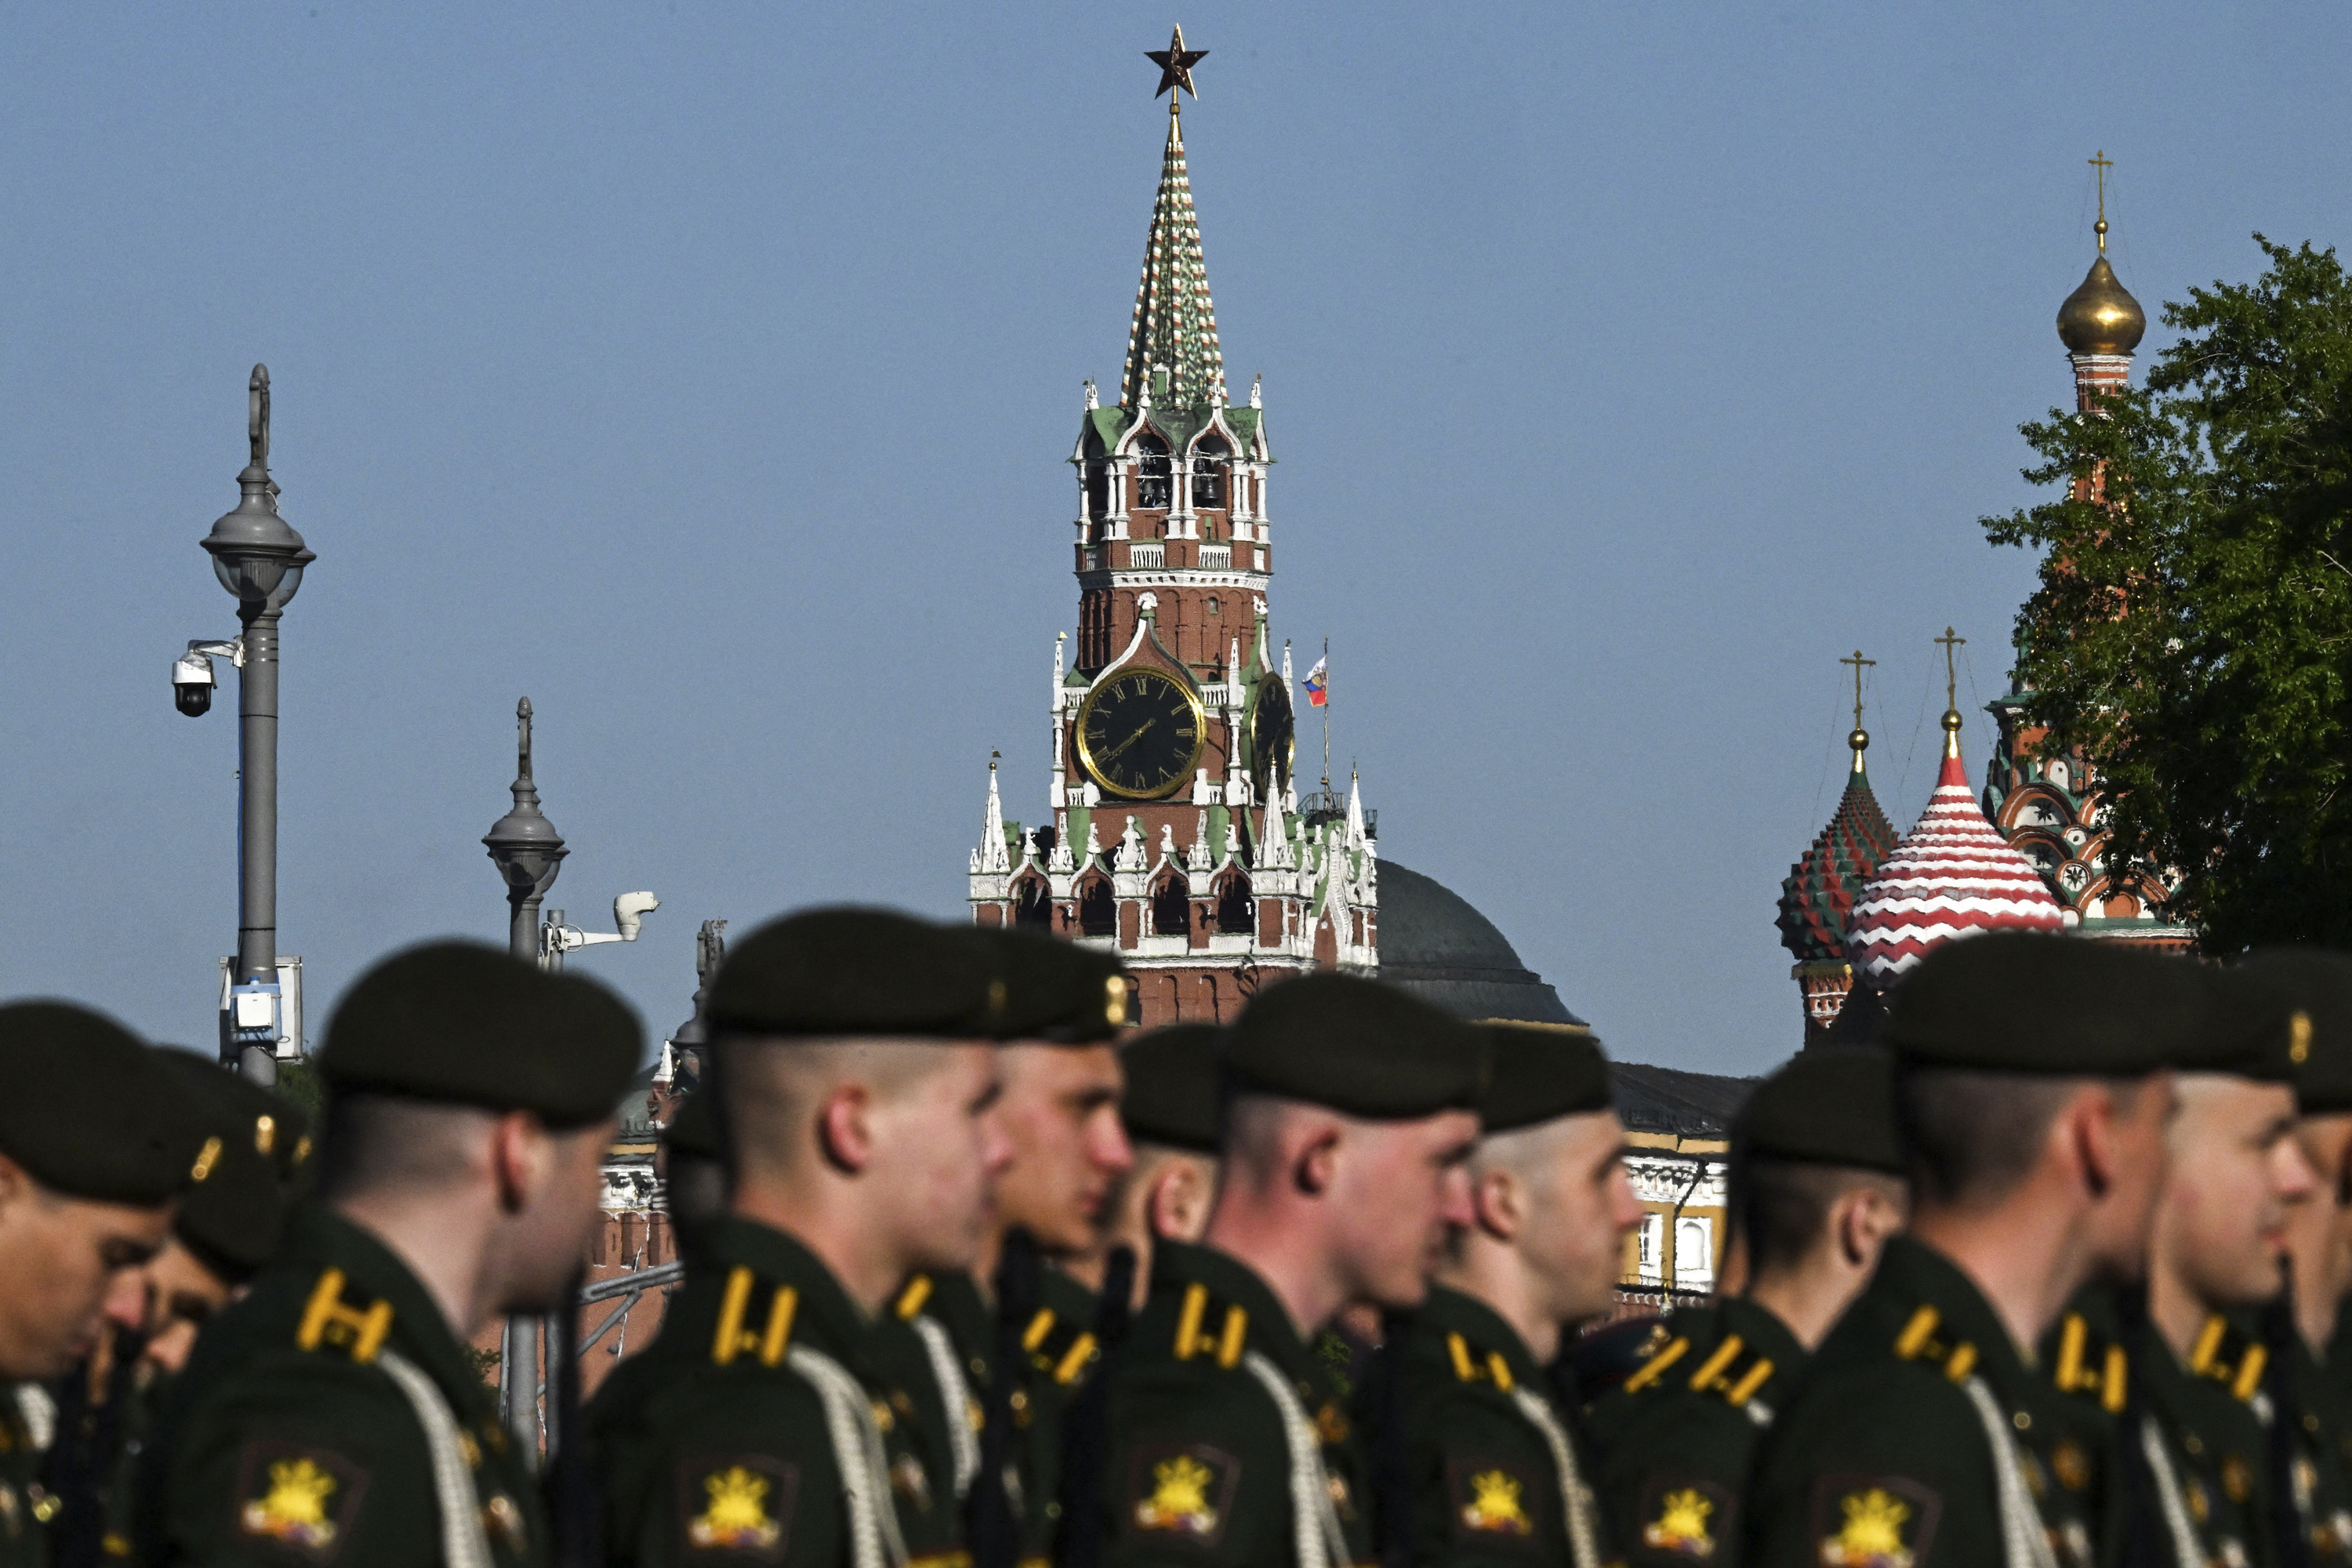 Russian servicemen are seen against the backdrop of the Kremlin and Saint Basil's cathedral during preparations for the Victory Day military parade rehearsal in Moscow, on Sunday, May 7.